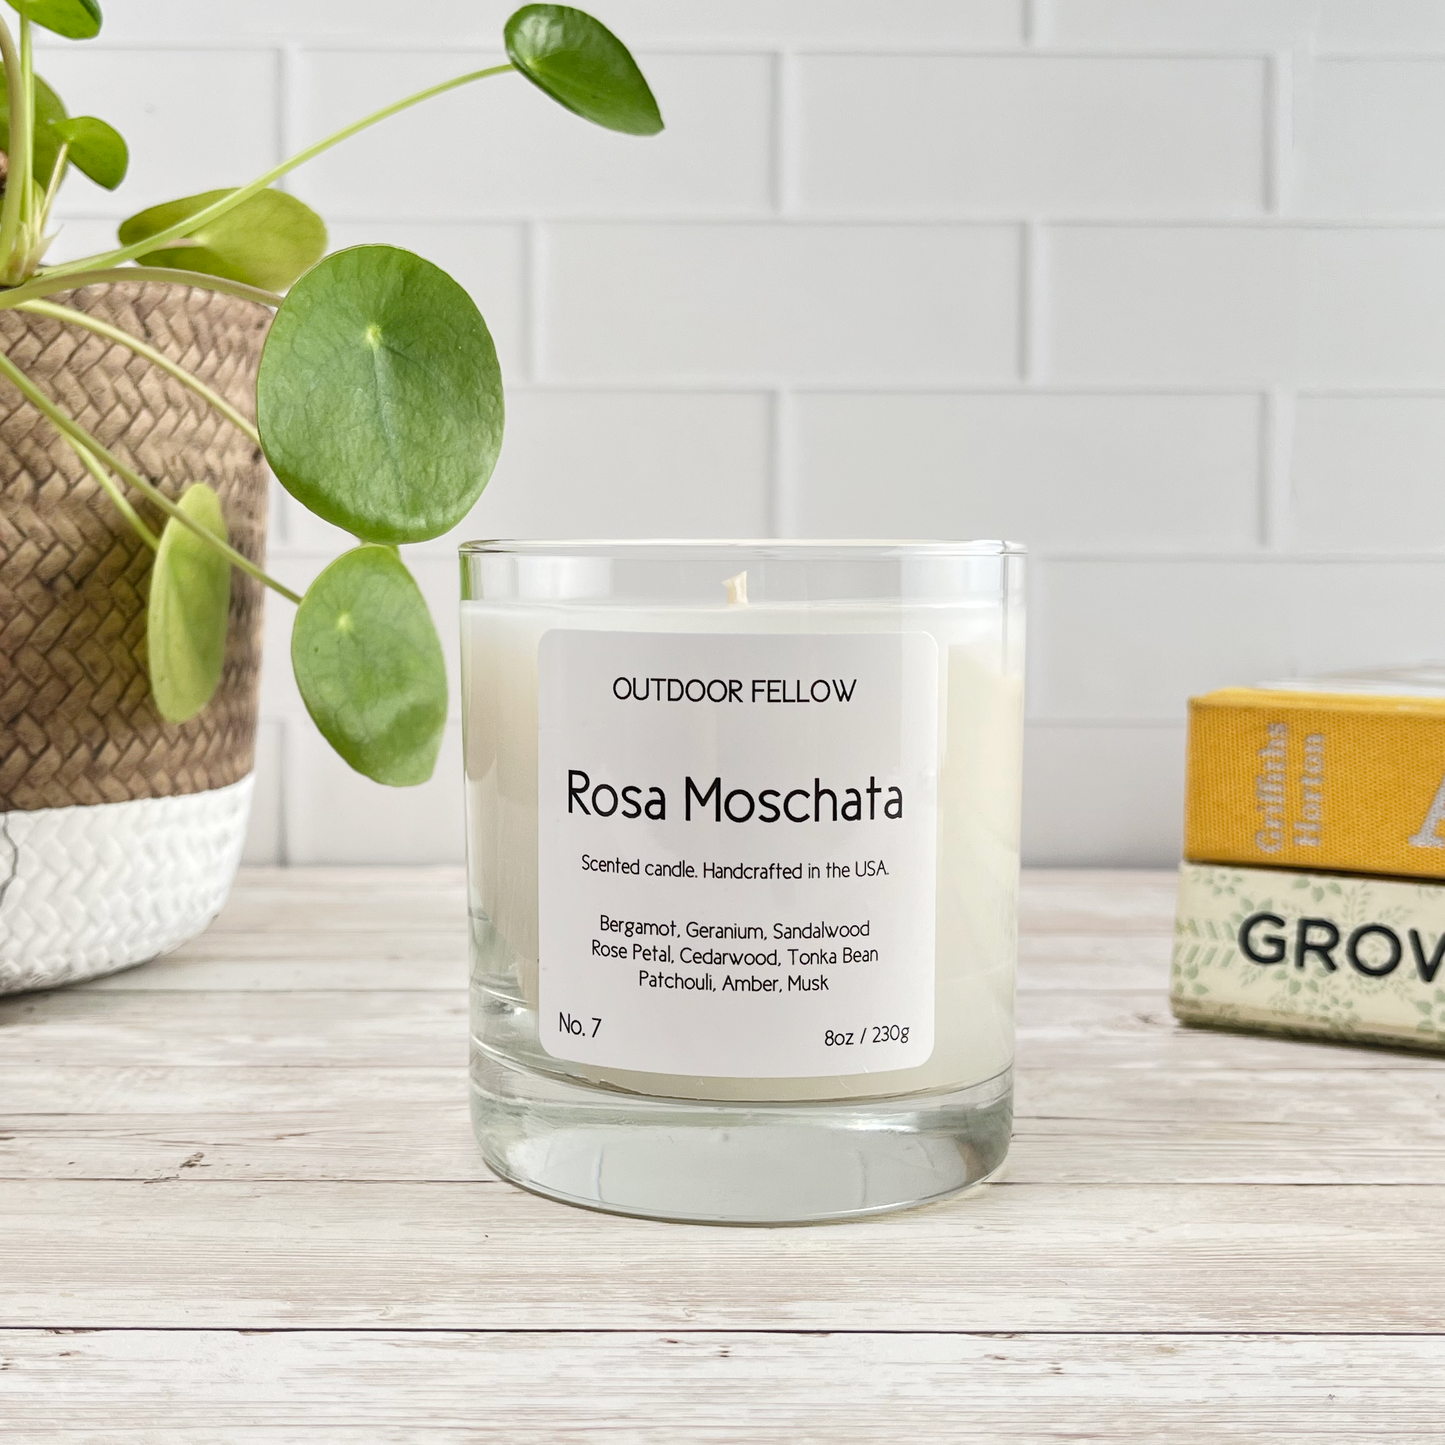 Rosa Moschata scented candle on wood surface in front of a plant and books